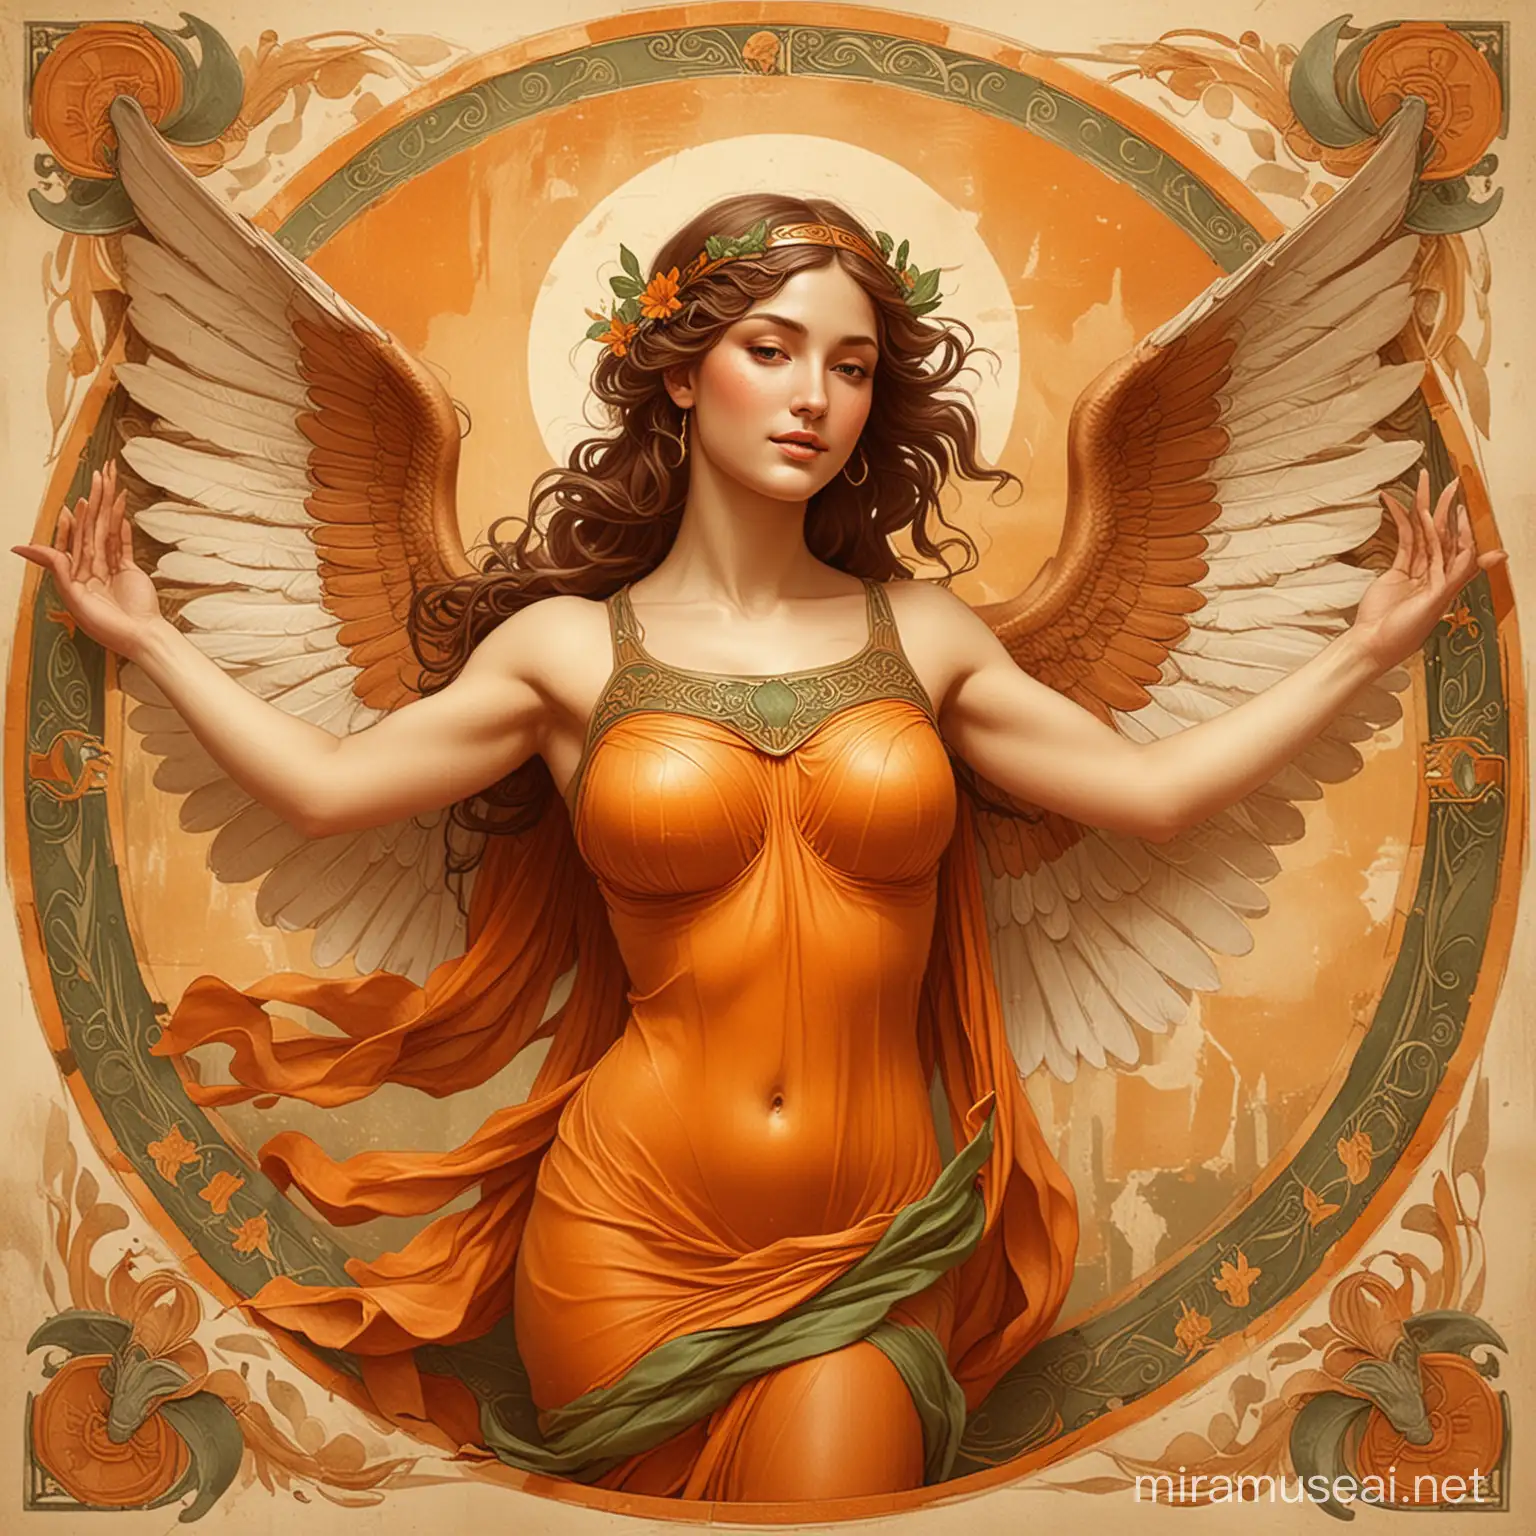 Celestial Goddess Embracing Nature with Universal Form in Earthy Hues